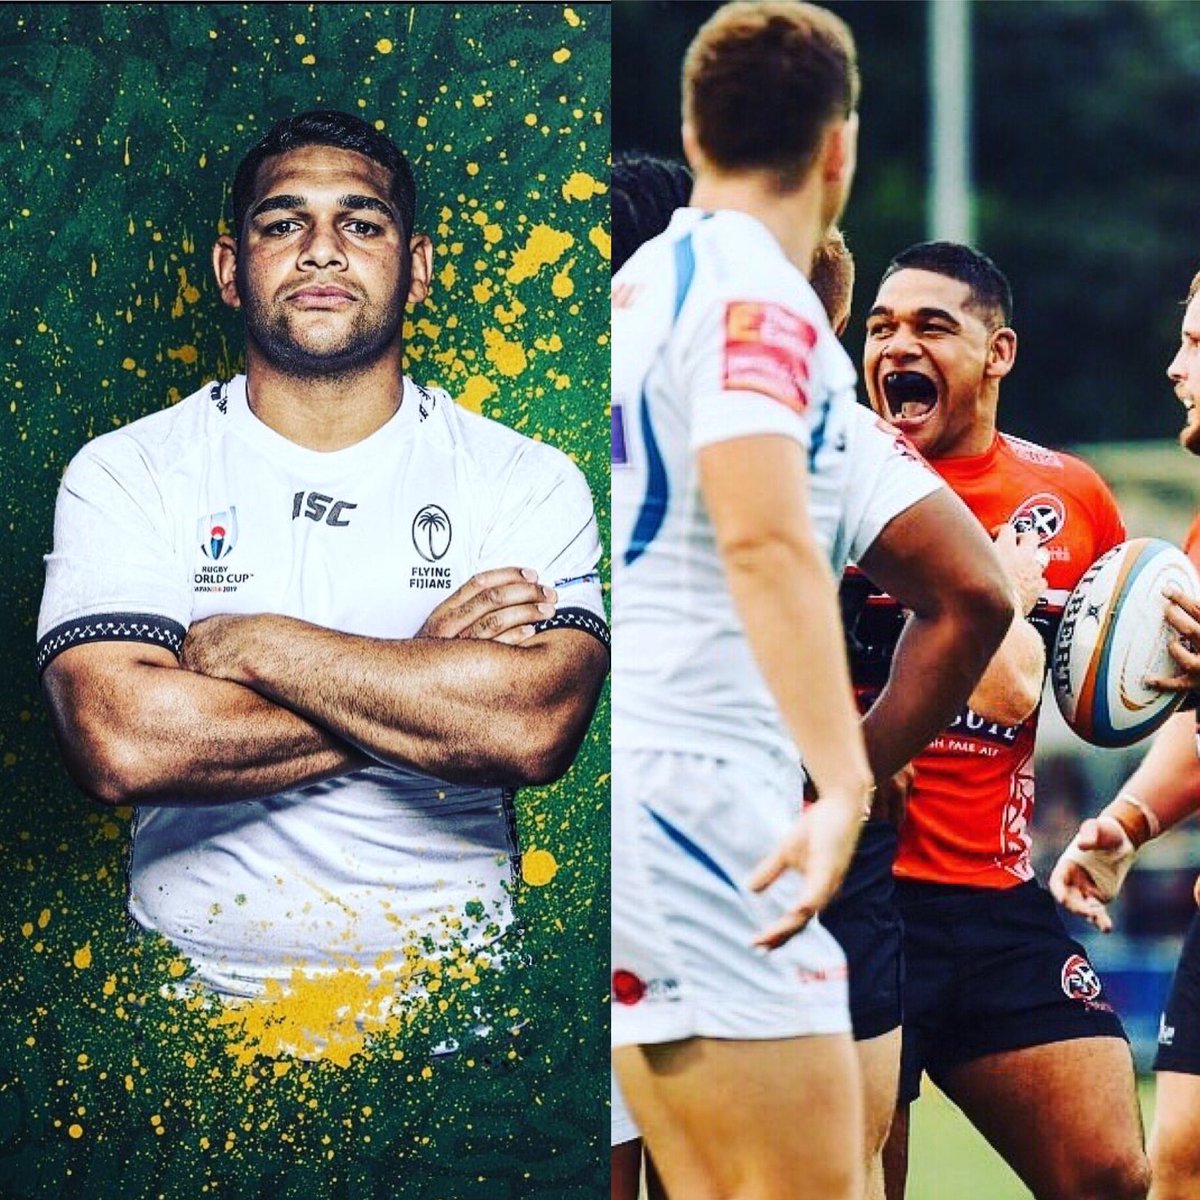 Thanks everyone for your kind messages, The @CornishPirates1 have been amazing to me and it’s been the best few years, a massive thanks to everyone involved at the club, super excited to chase a dream with the @SaintsRugby and see where the journey goes! #OnceAPirate 🔴⚫️